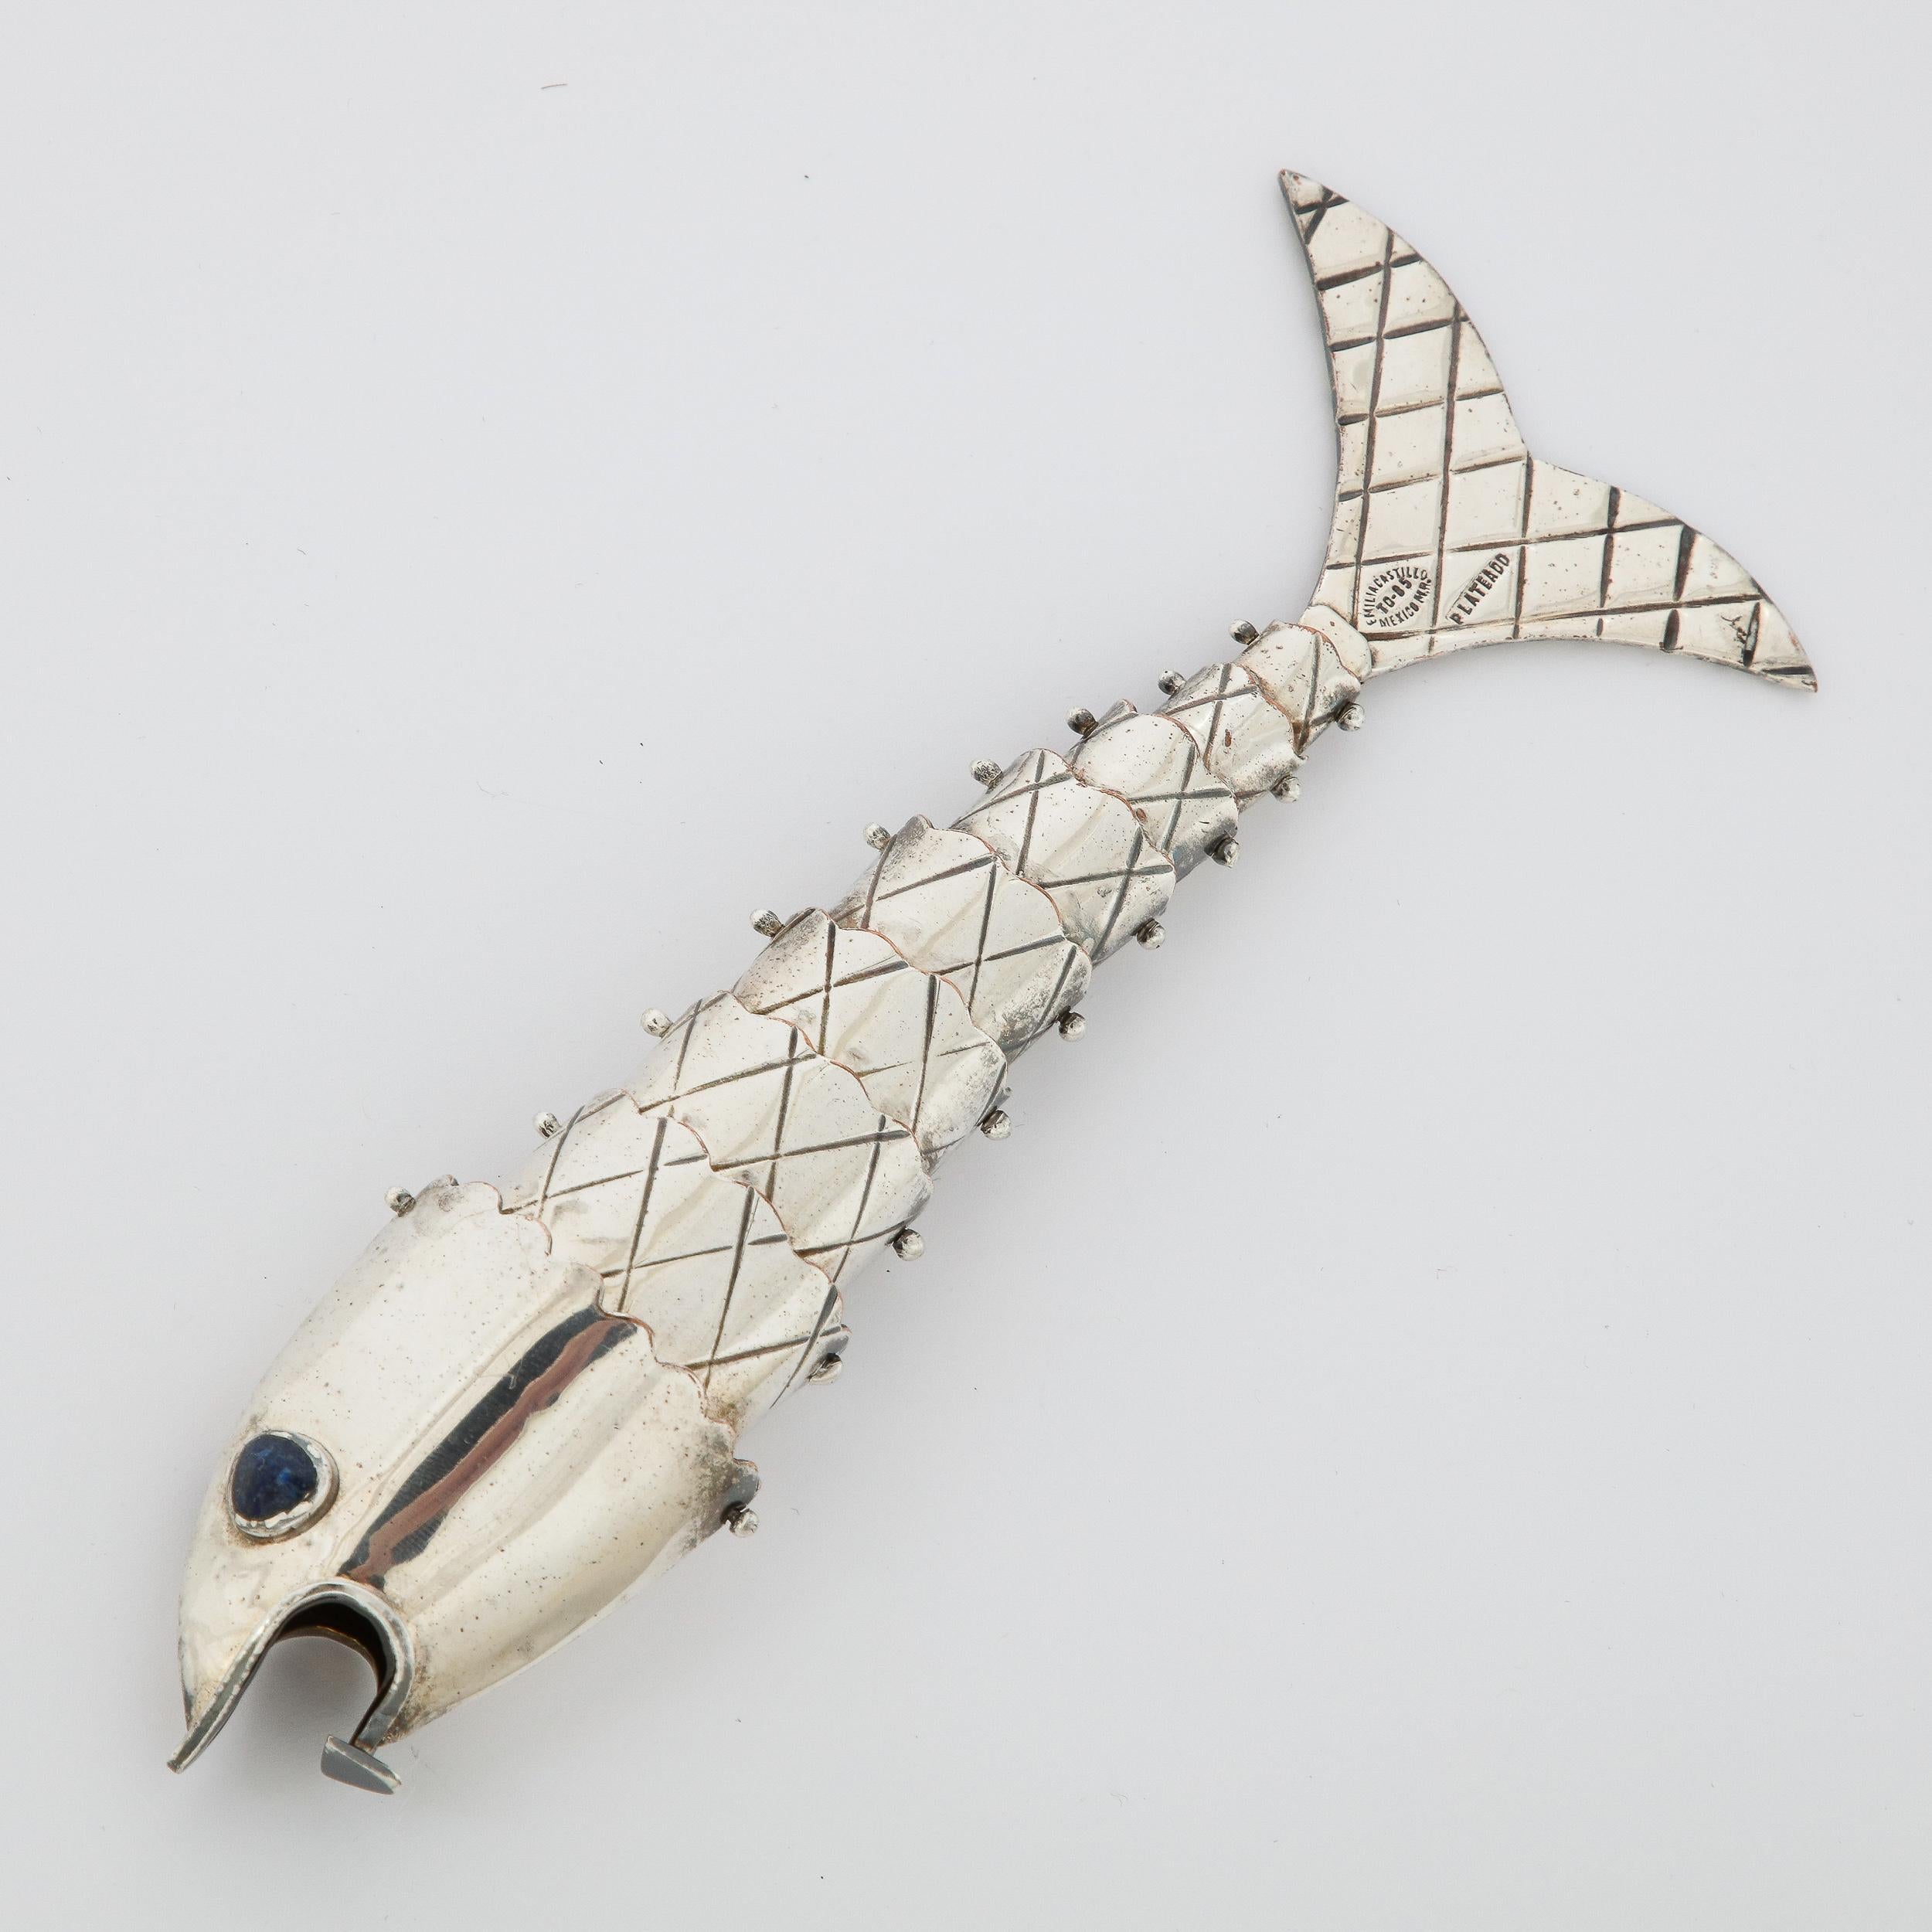 Modernist Hand Crafted Silver Plate Fish Bottle Opener by Emilia Castillo 2